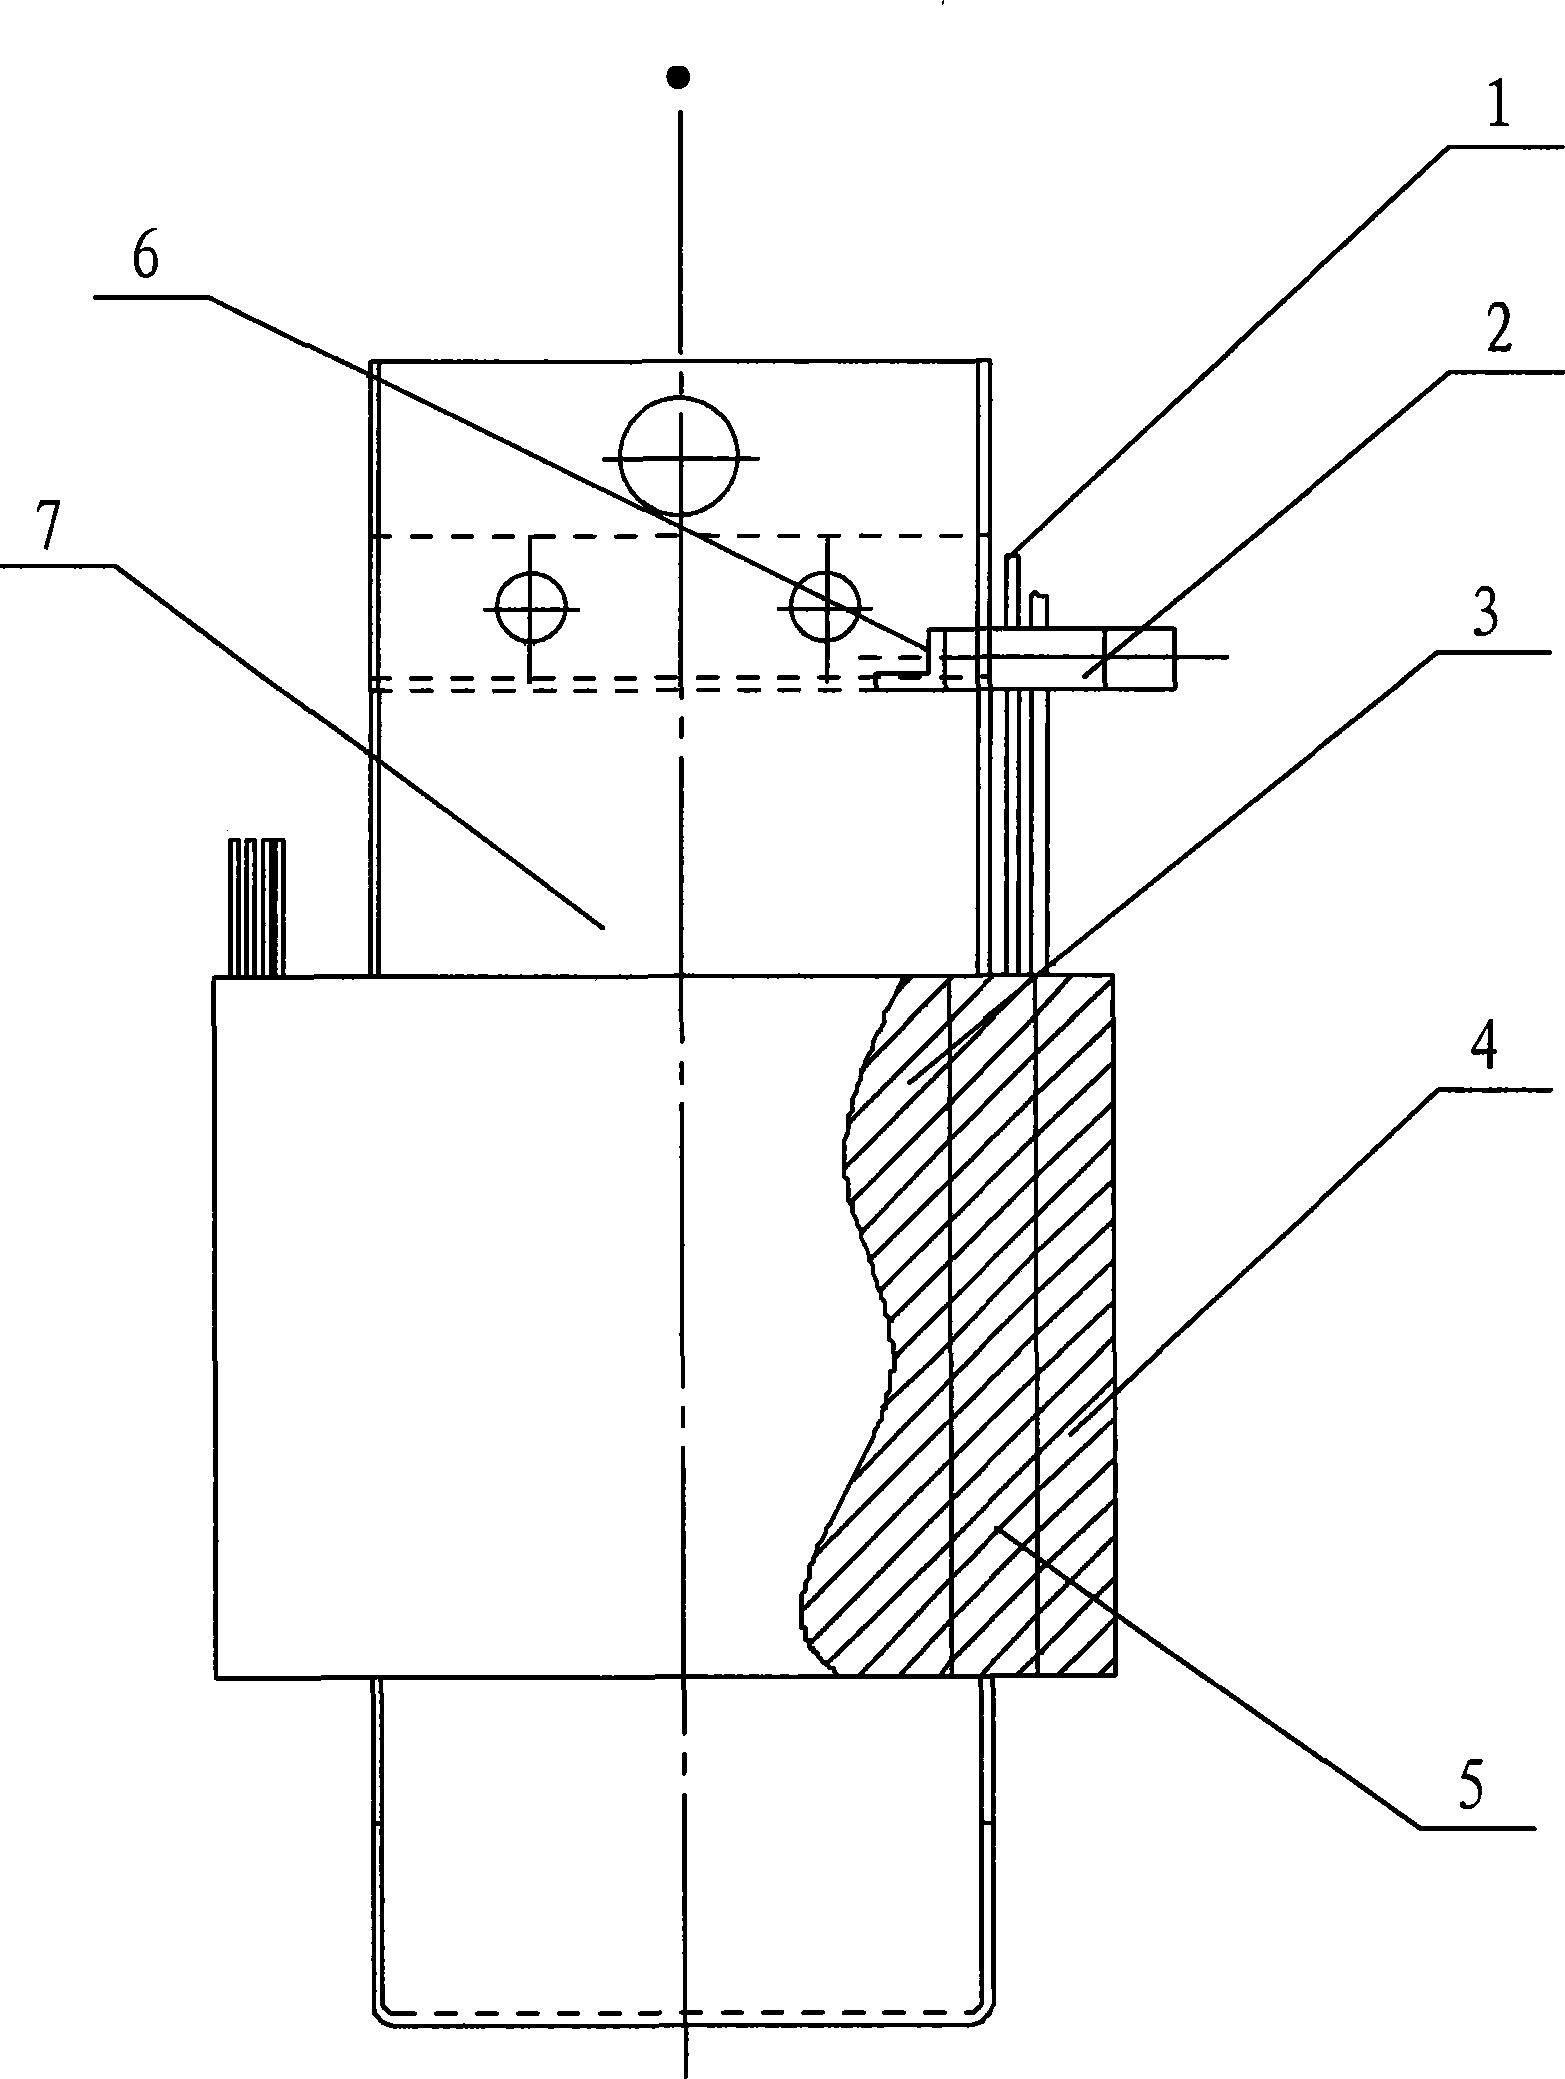 Structure of amorphous alloy oil immersion type distribution transformer and manufacturing method thereof